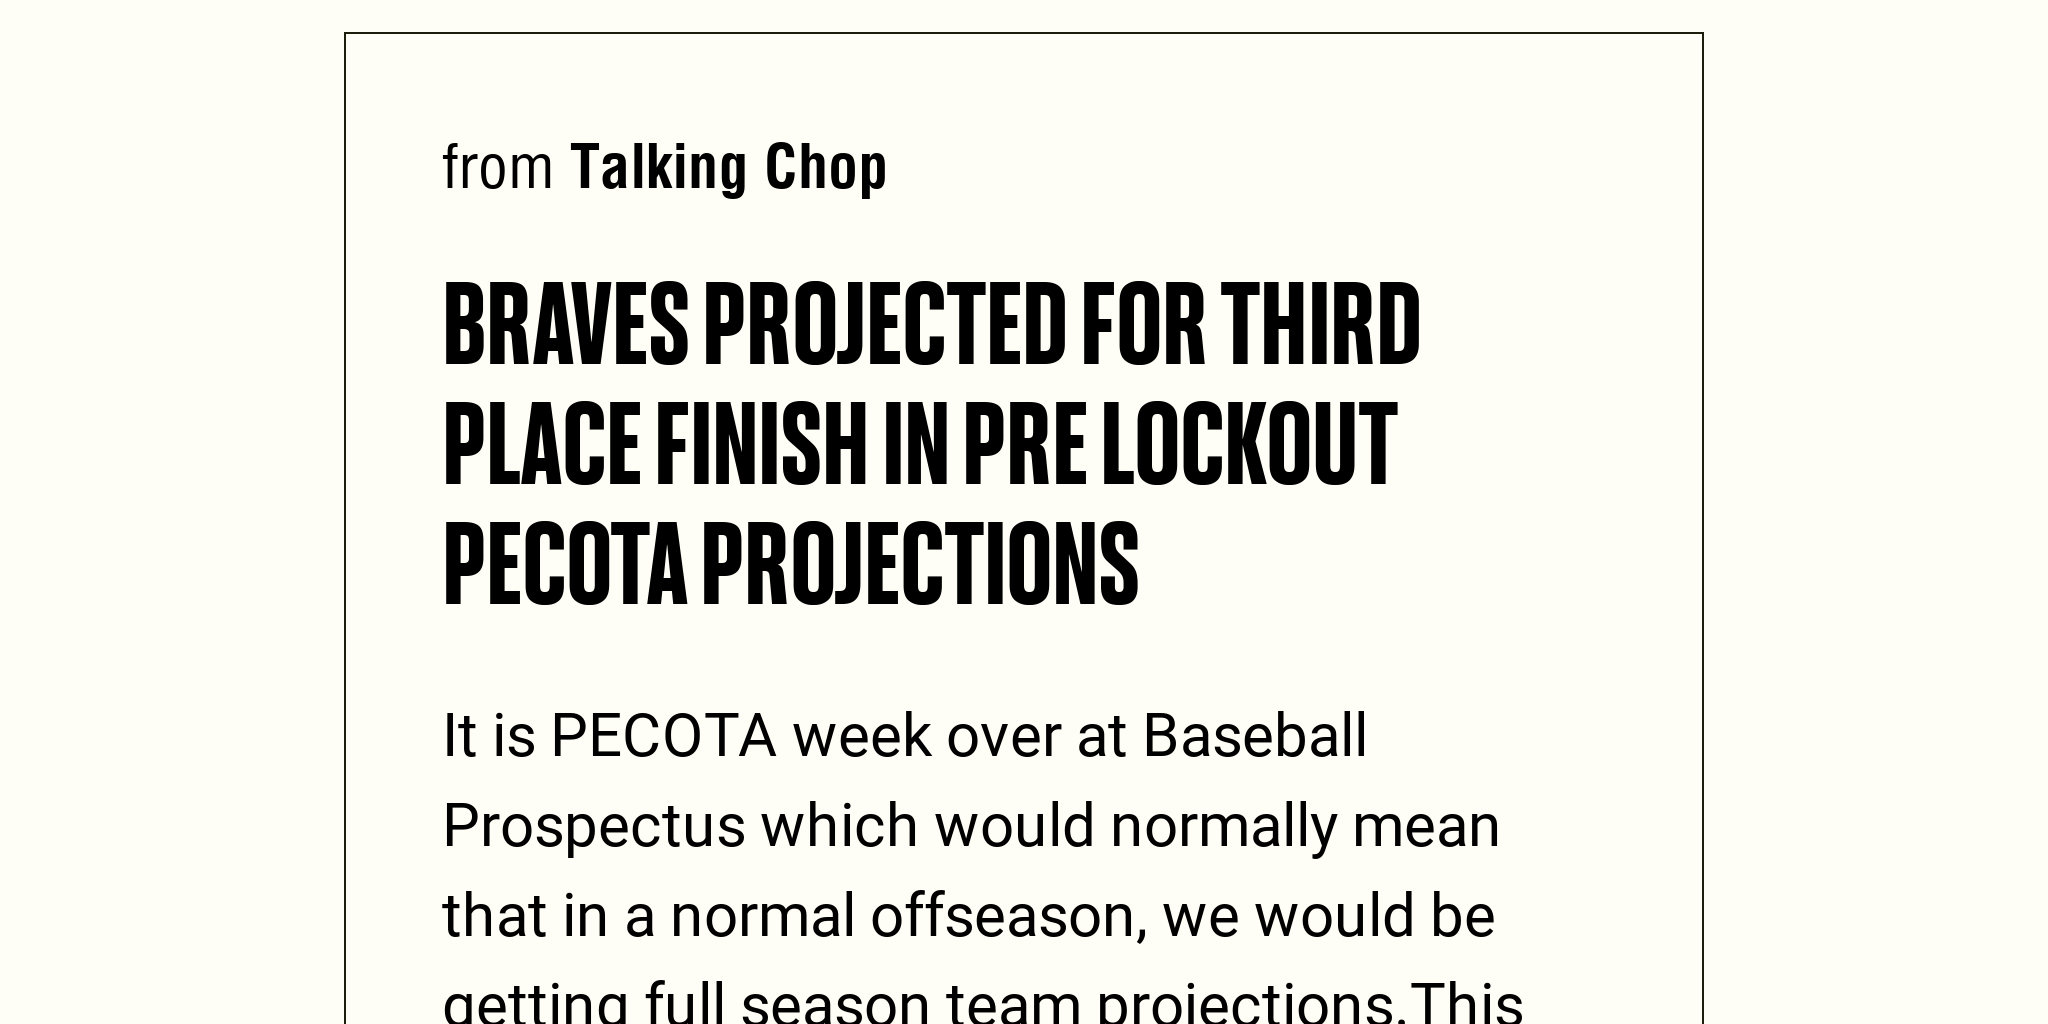 Braves projected for third place finish in pre lockout PECOTA